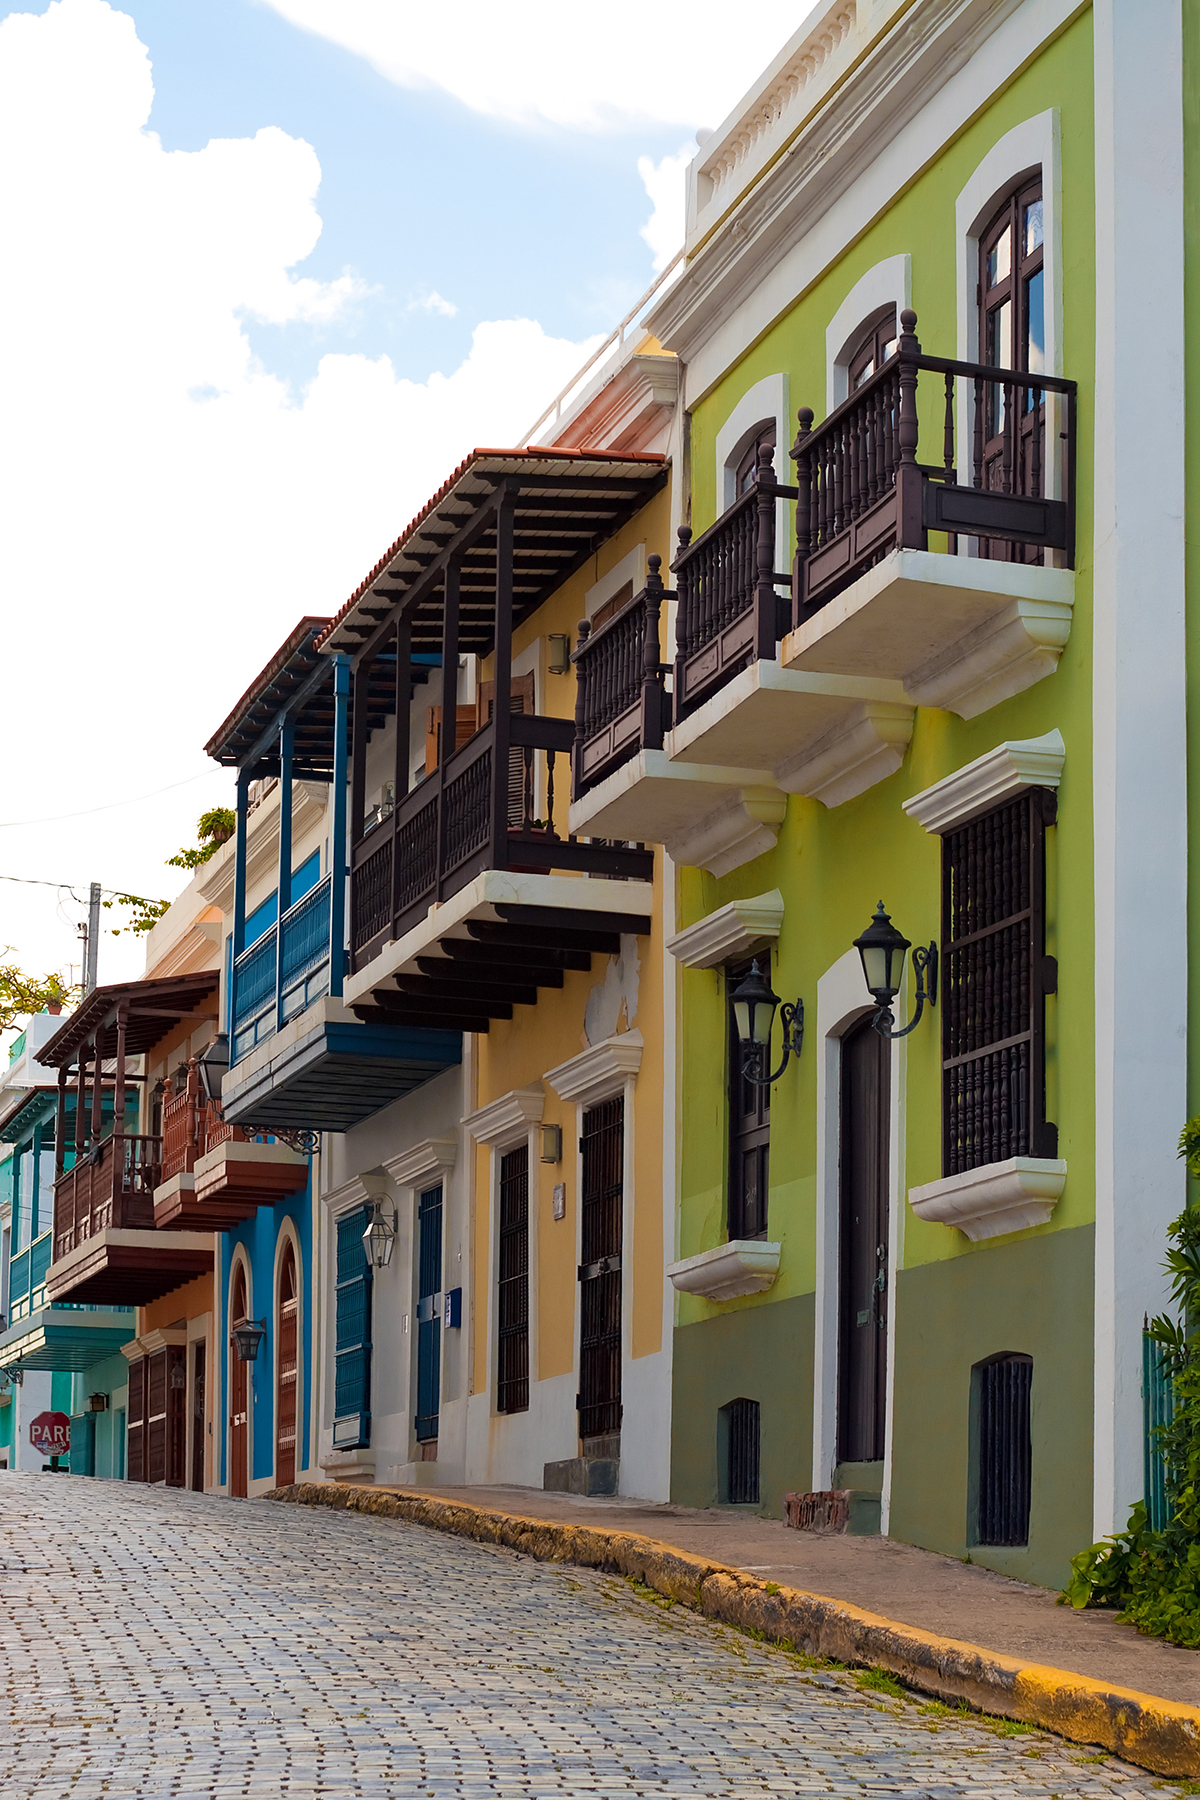 A row of colorful pastel painted buildings in Old San Juan Puerto Rico.